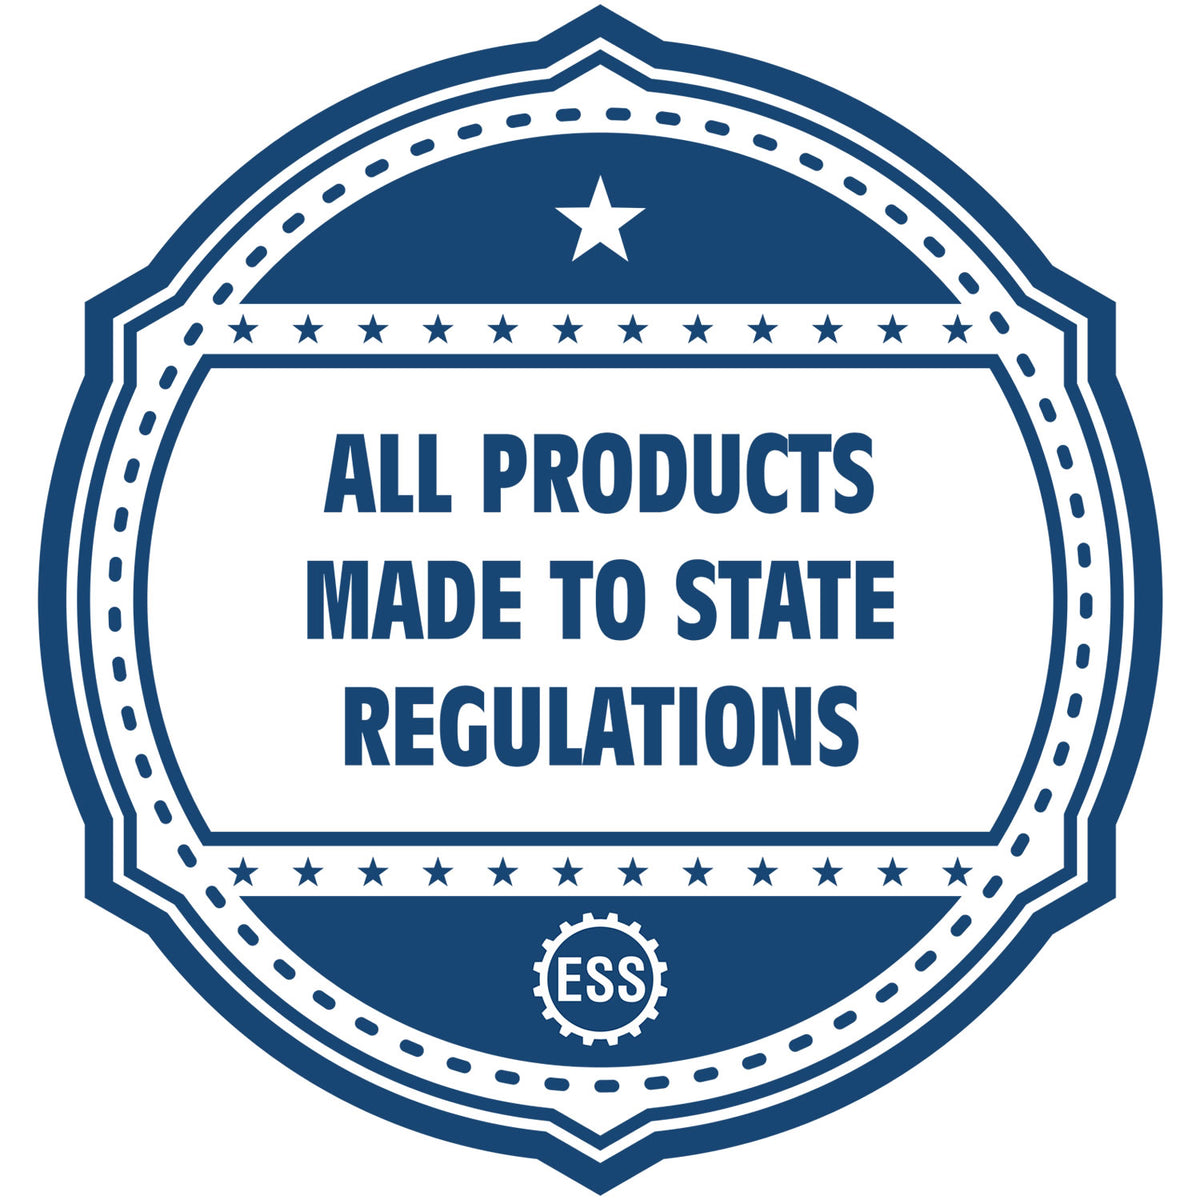 An icon or badge element for the State of Mississippi Soft Land Surveyor Embossing Seal showing that this product is made in compliance with state regulations.